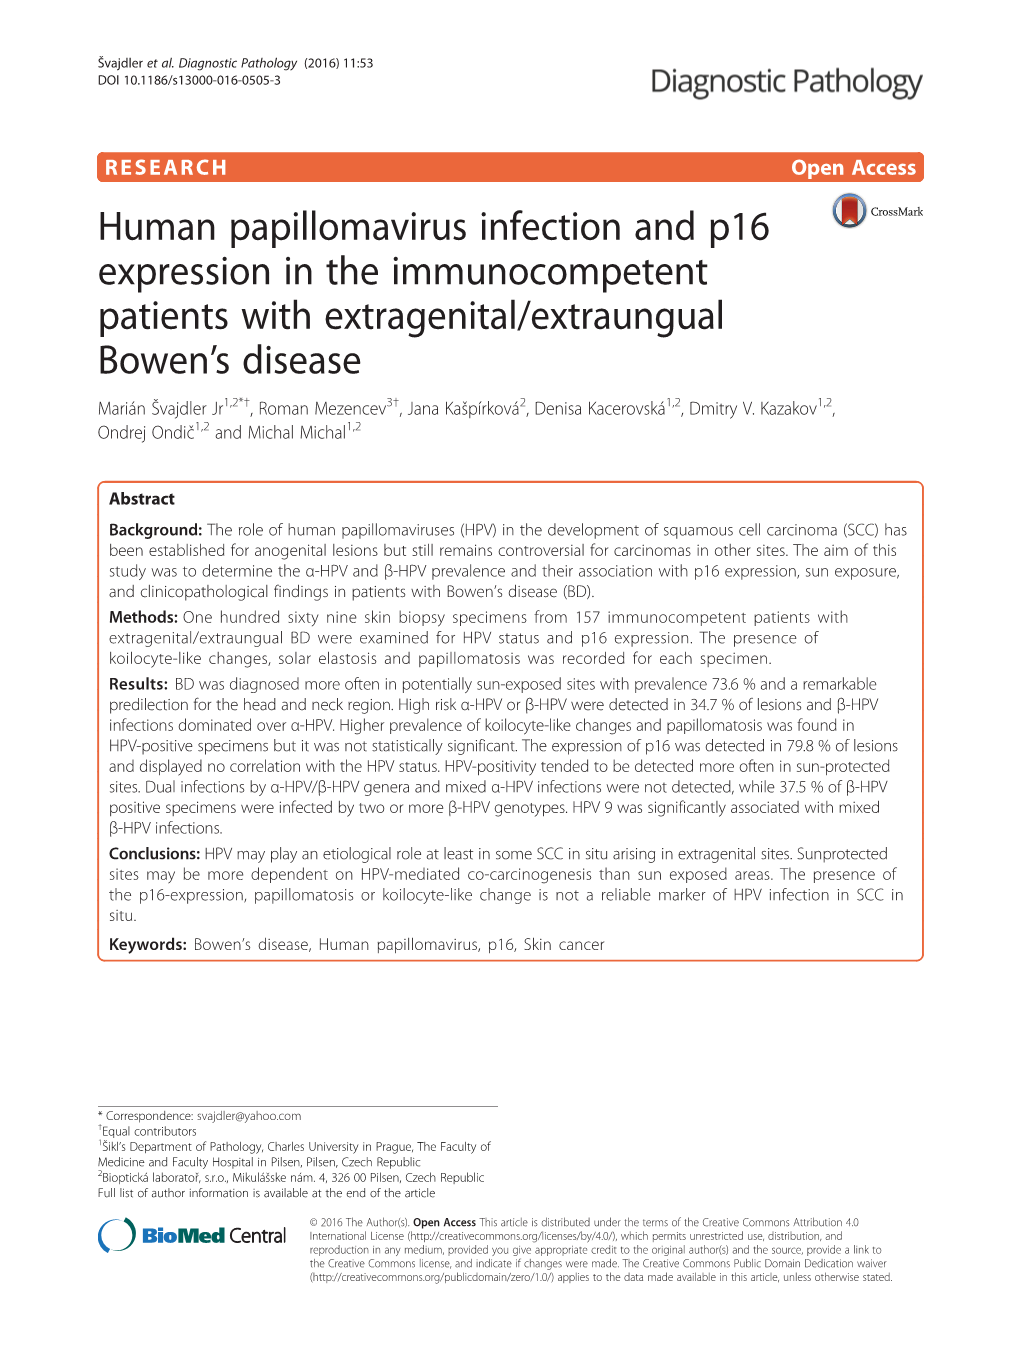 Human Papillomavirus Infection and P16 Expression in The